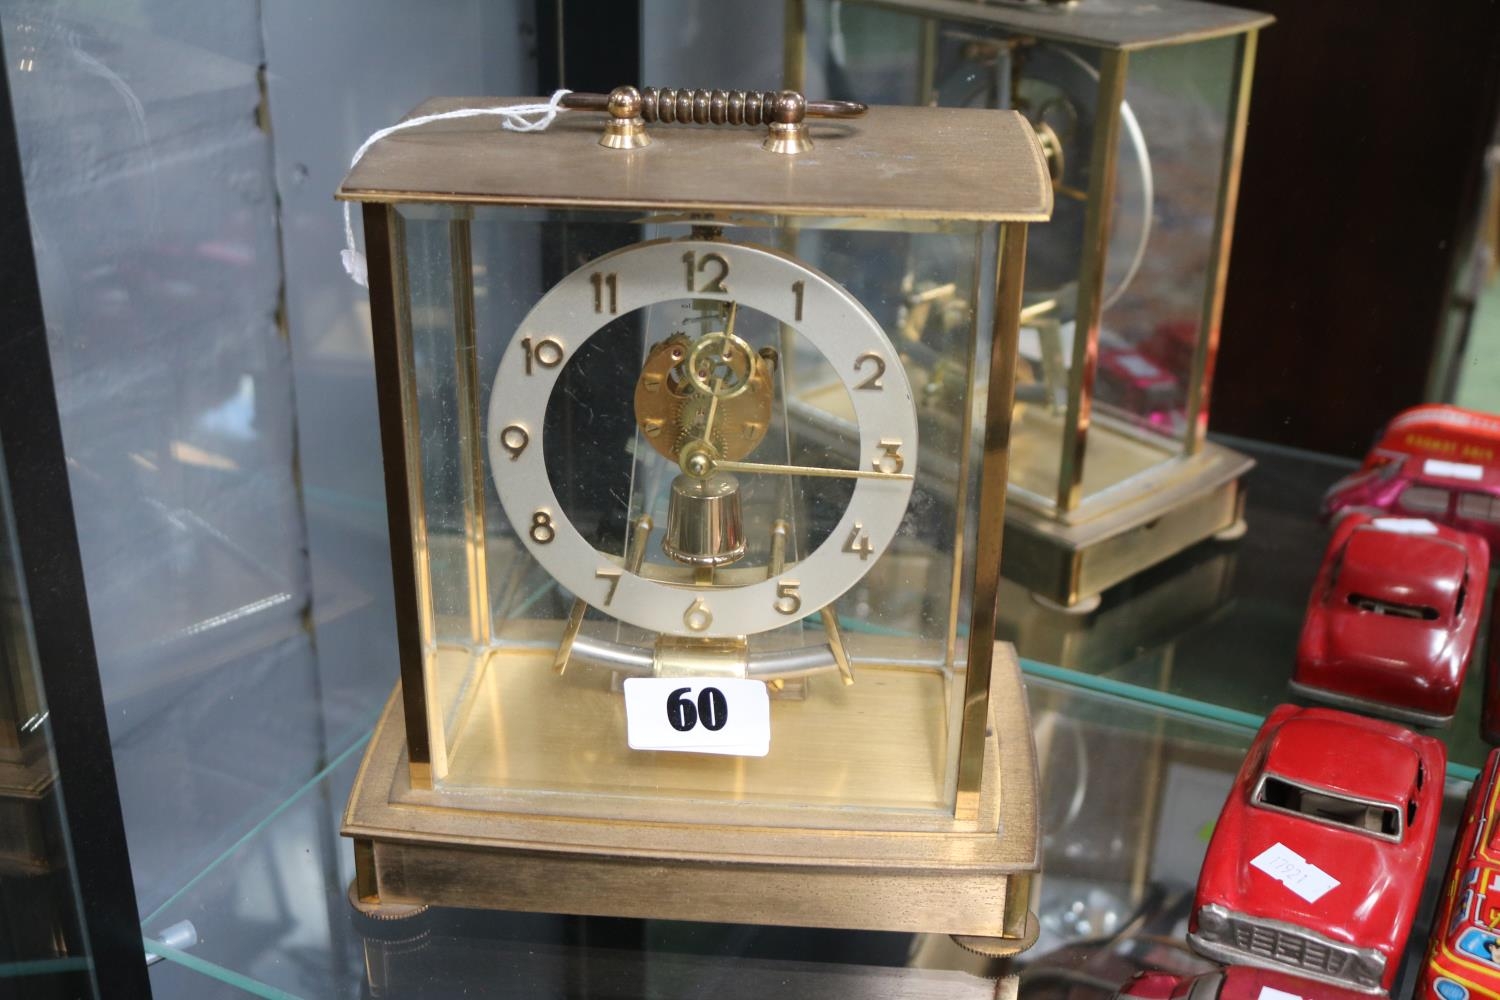 Kieninger & Obergfell Electric clock with numeral face and brass case - Image 2 of 2